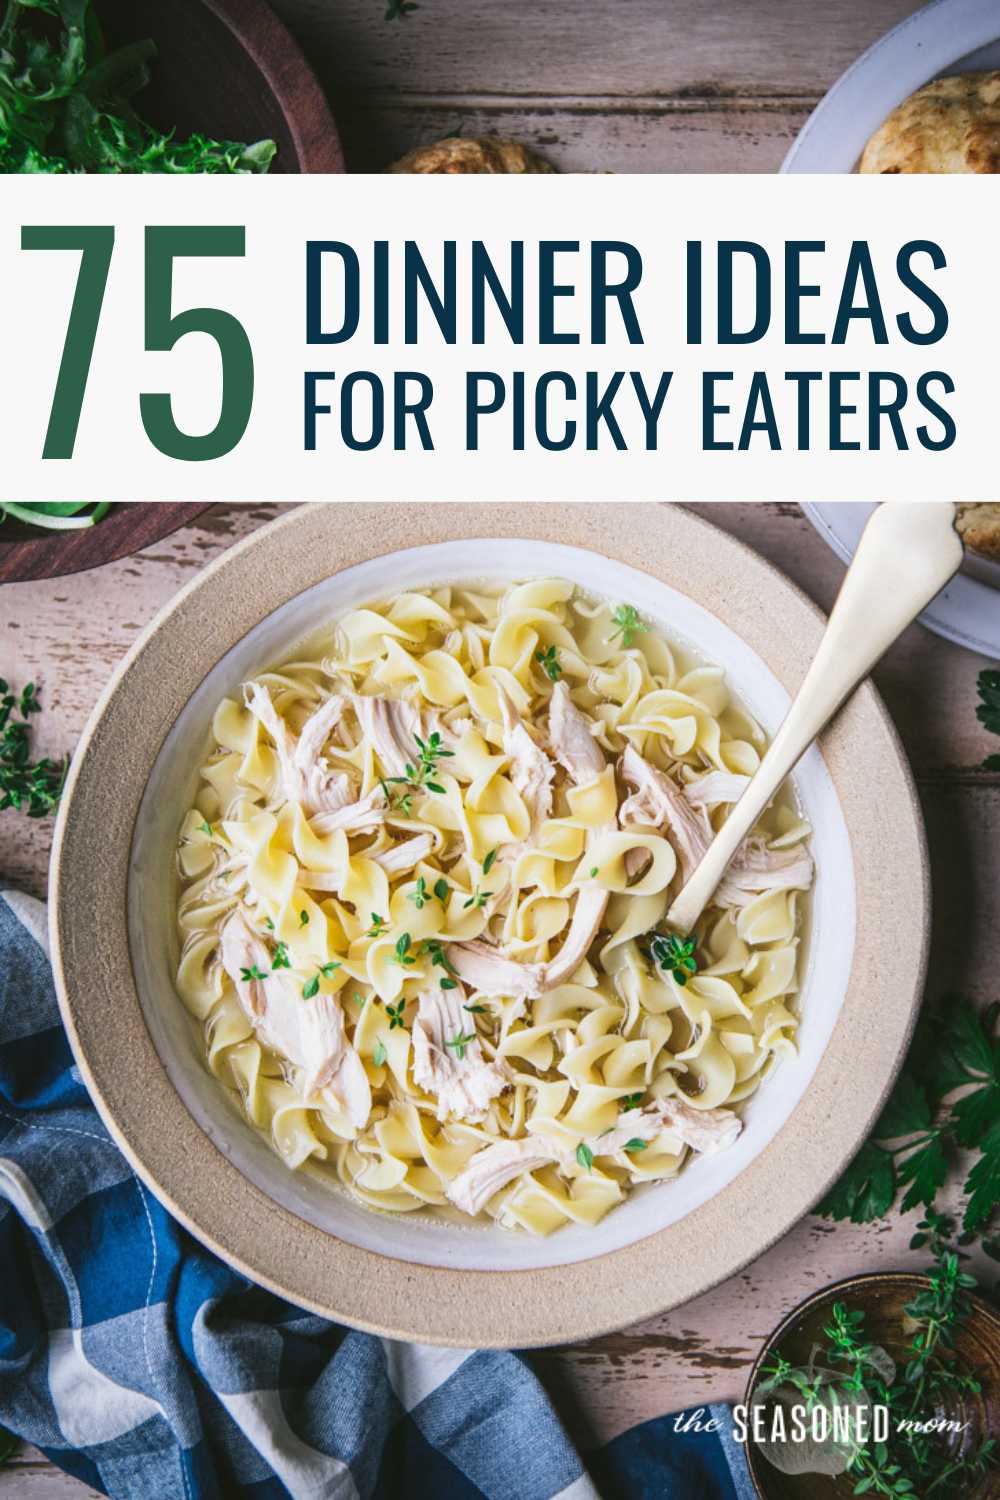 Chicken and noodles on a collage of dinner ideas for picky eaters